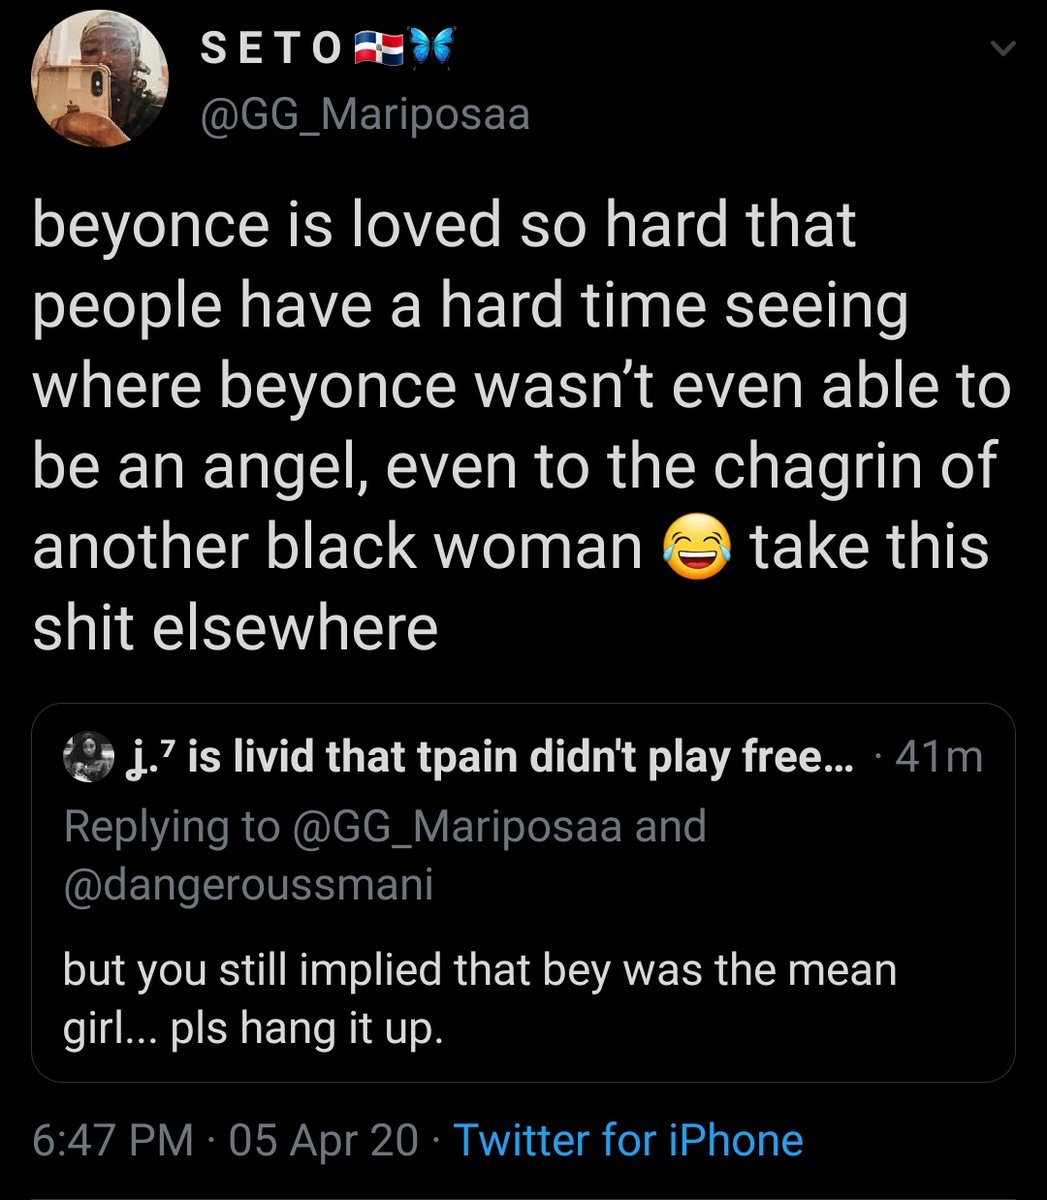 let's get one thing straight, darling.  @GG_Mariposaa yall only say sh*t like this bc of how bey was the most loved one in dc and make assumptions that she had it the "easiest" in the group. when in reality, just like the others, her father made it hard on her too.